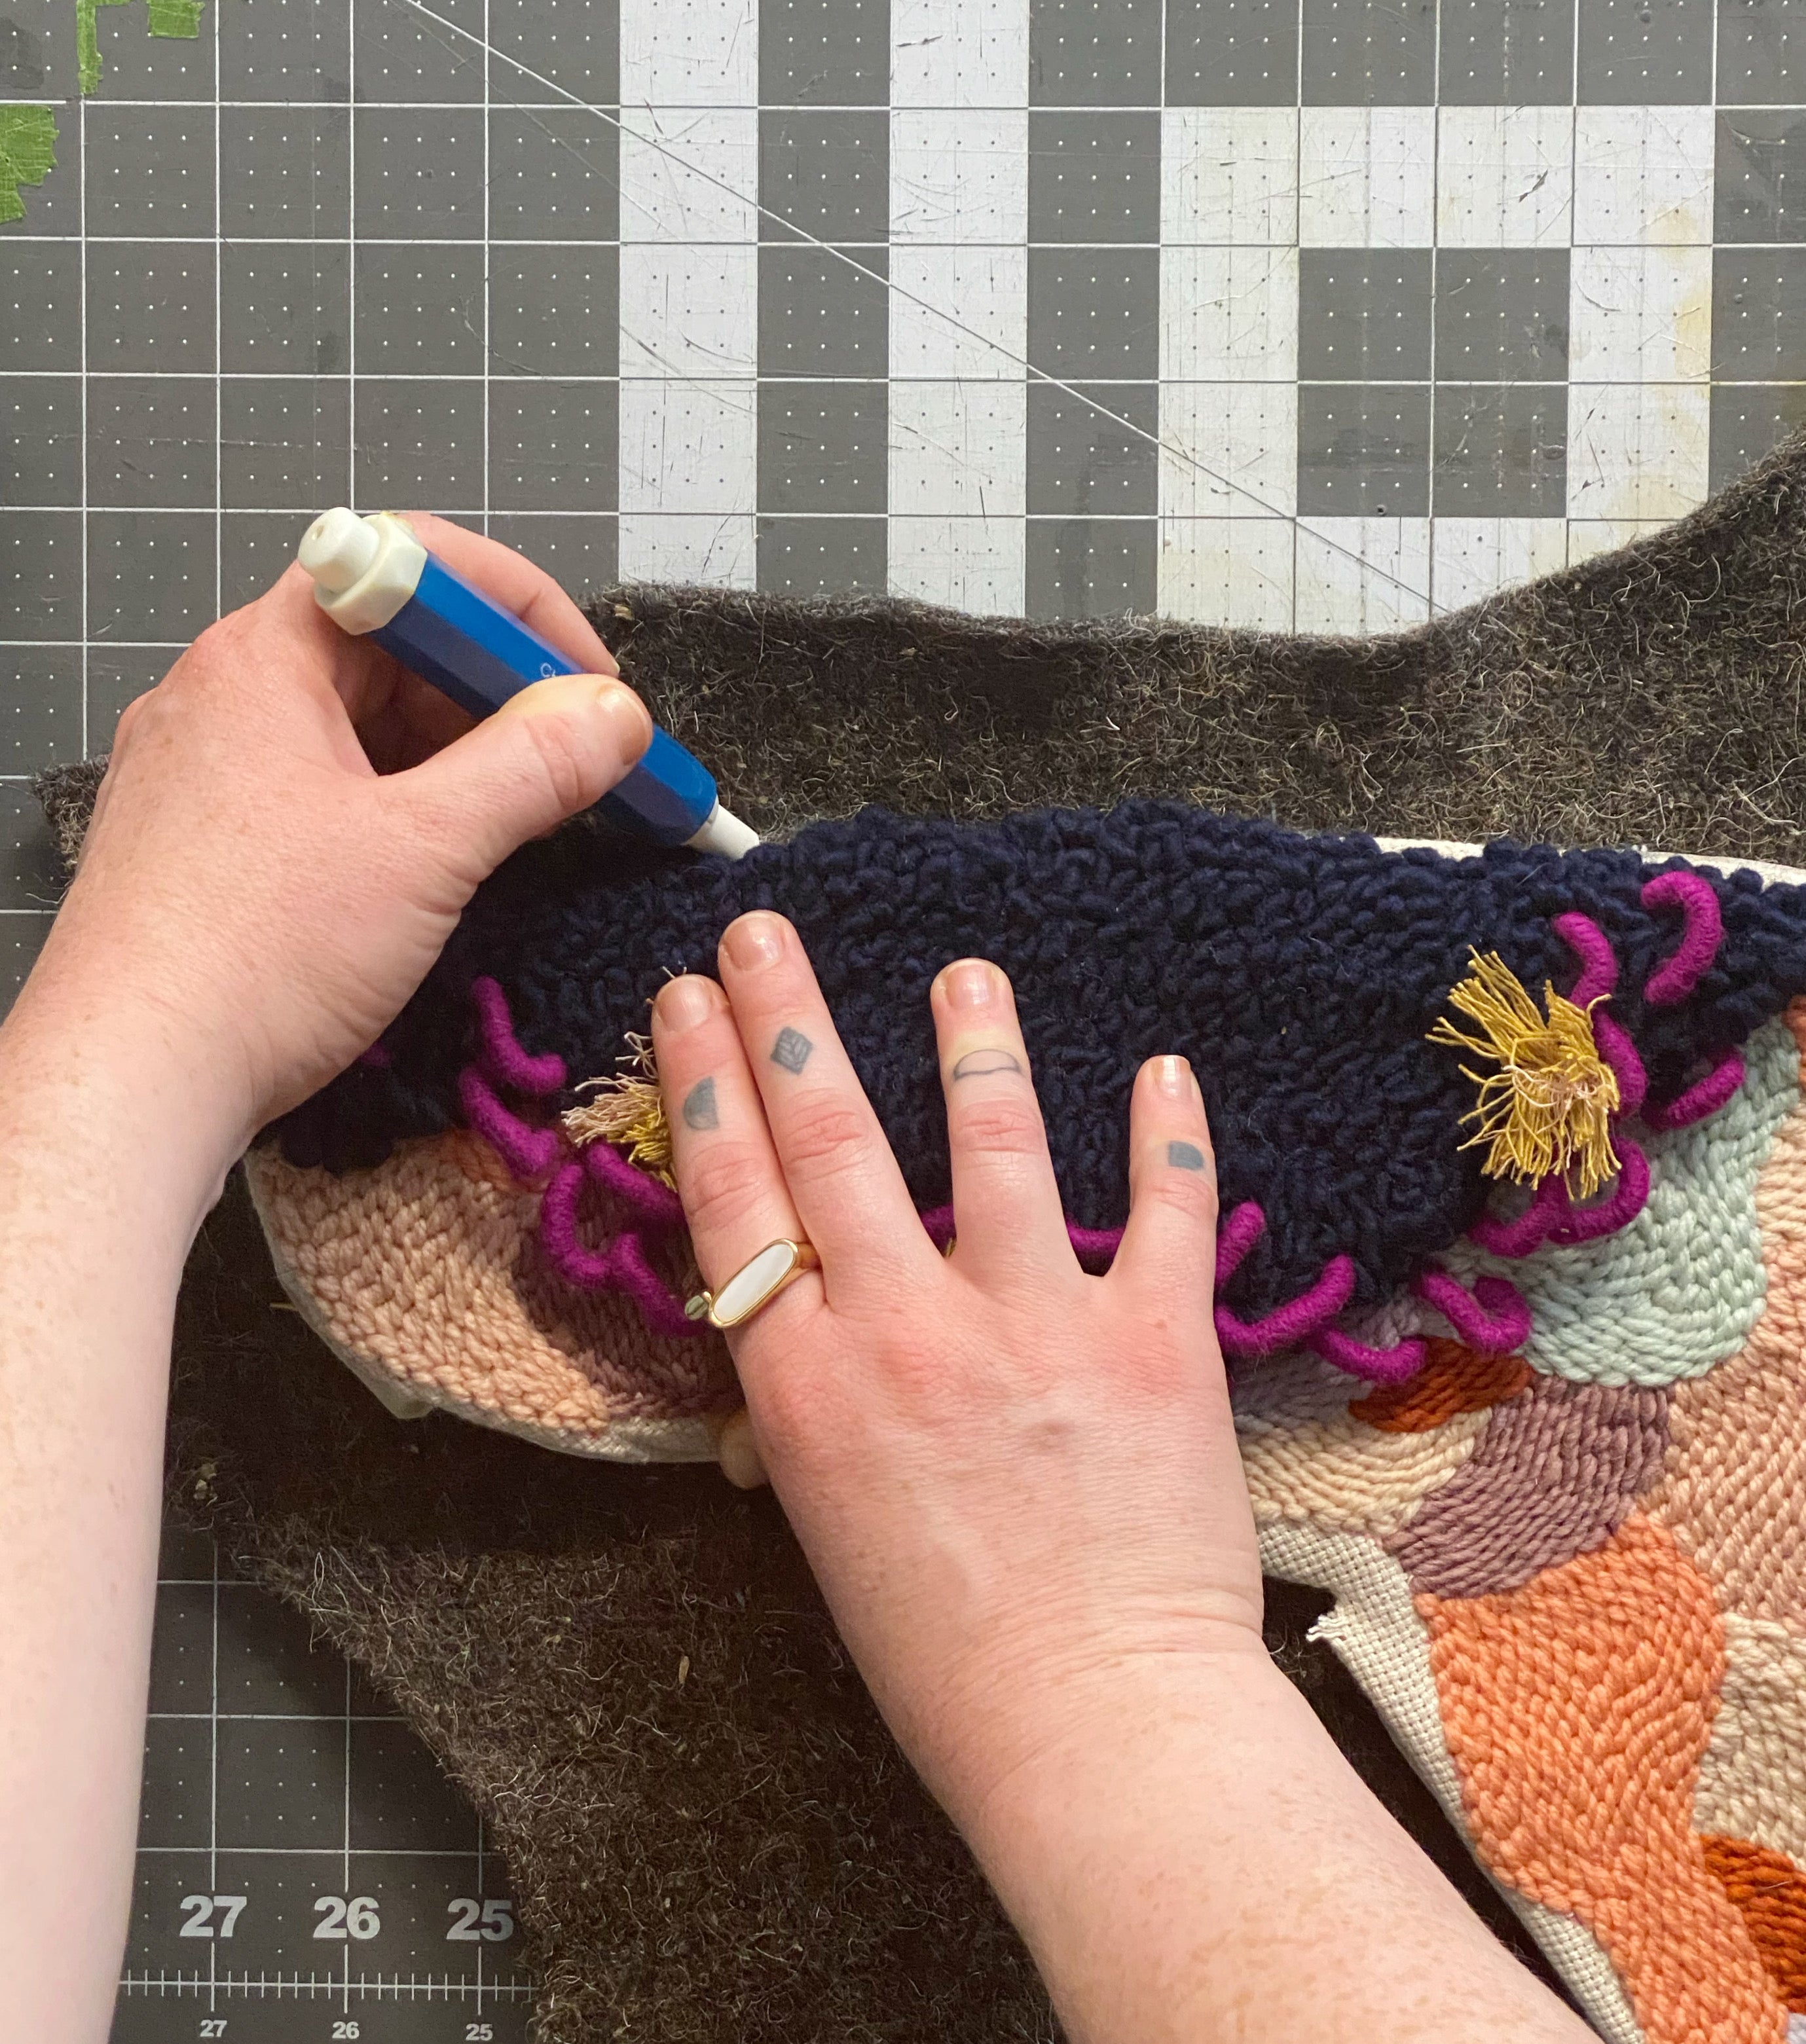 How To Back Punch Needle Projects with Industrial Felt Featuring Katie Berman Tutorial Trace